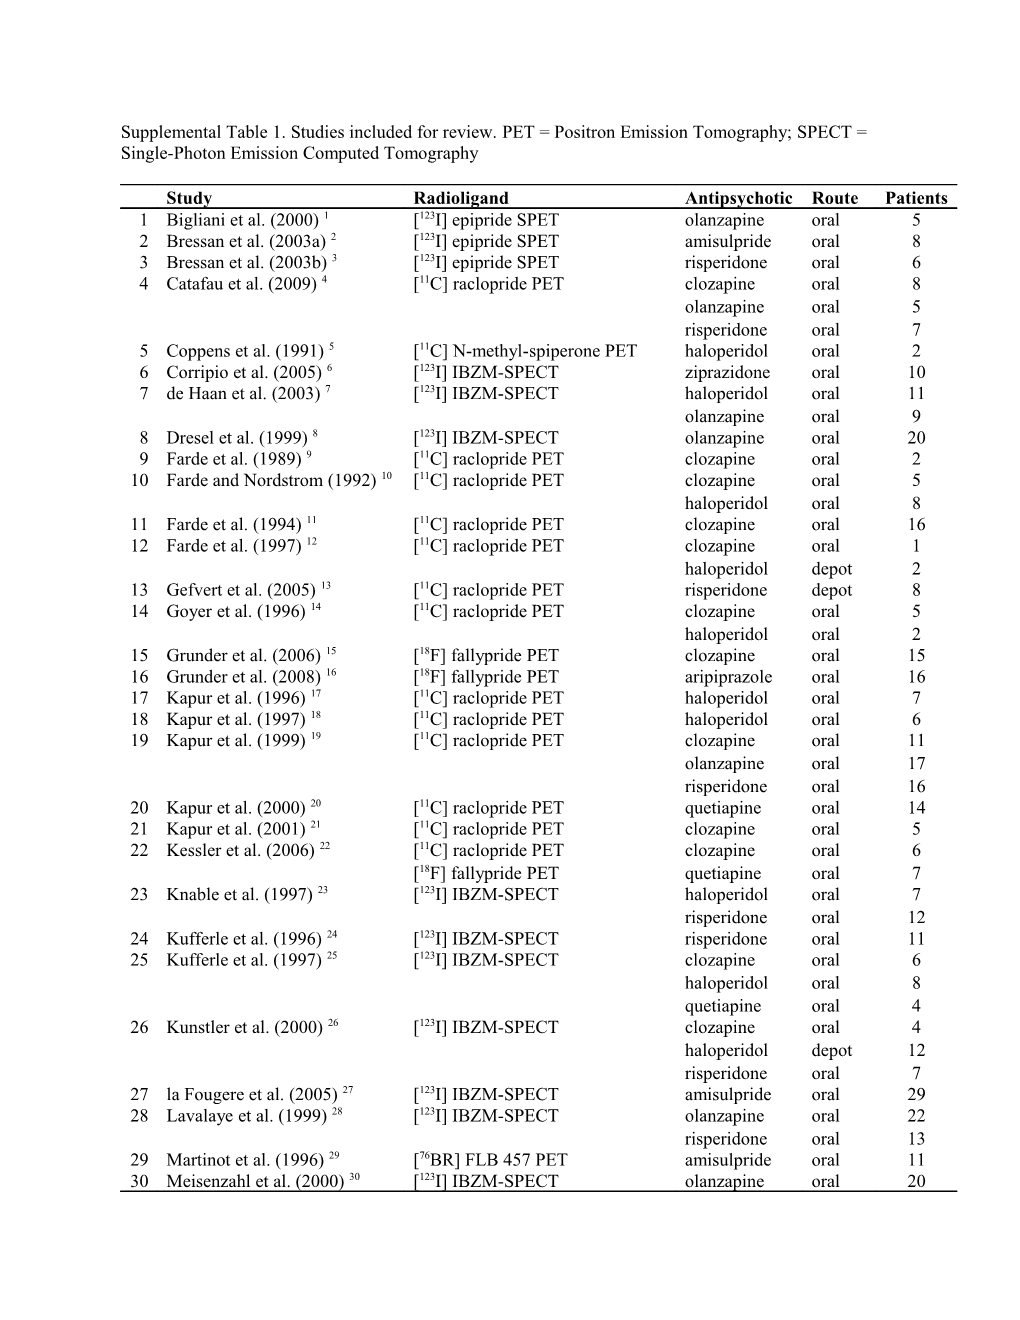 Supplemental Table 1. Studies Included for Review. PET = Positron Emission Tomography;